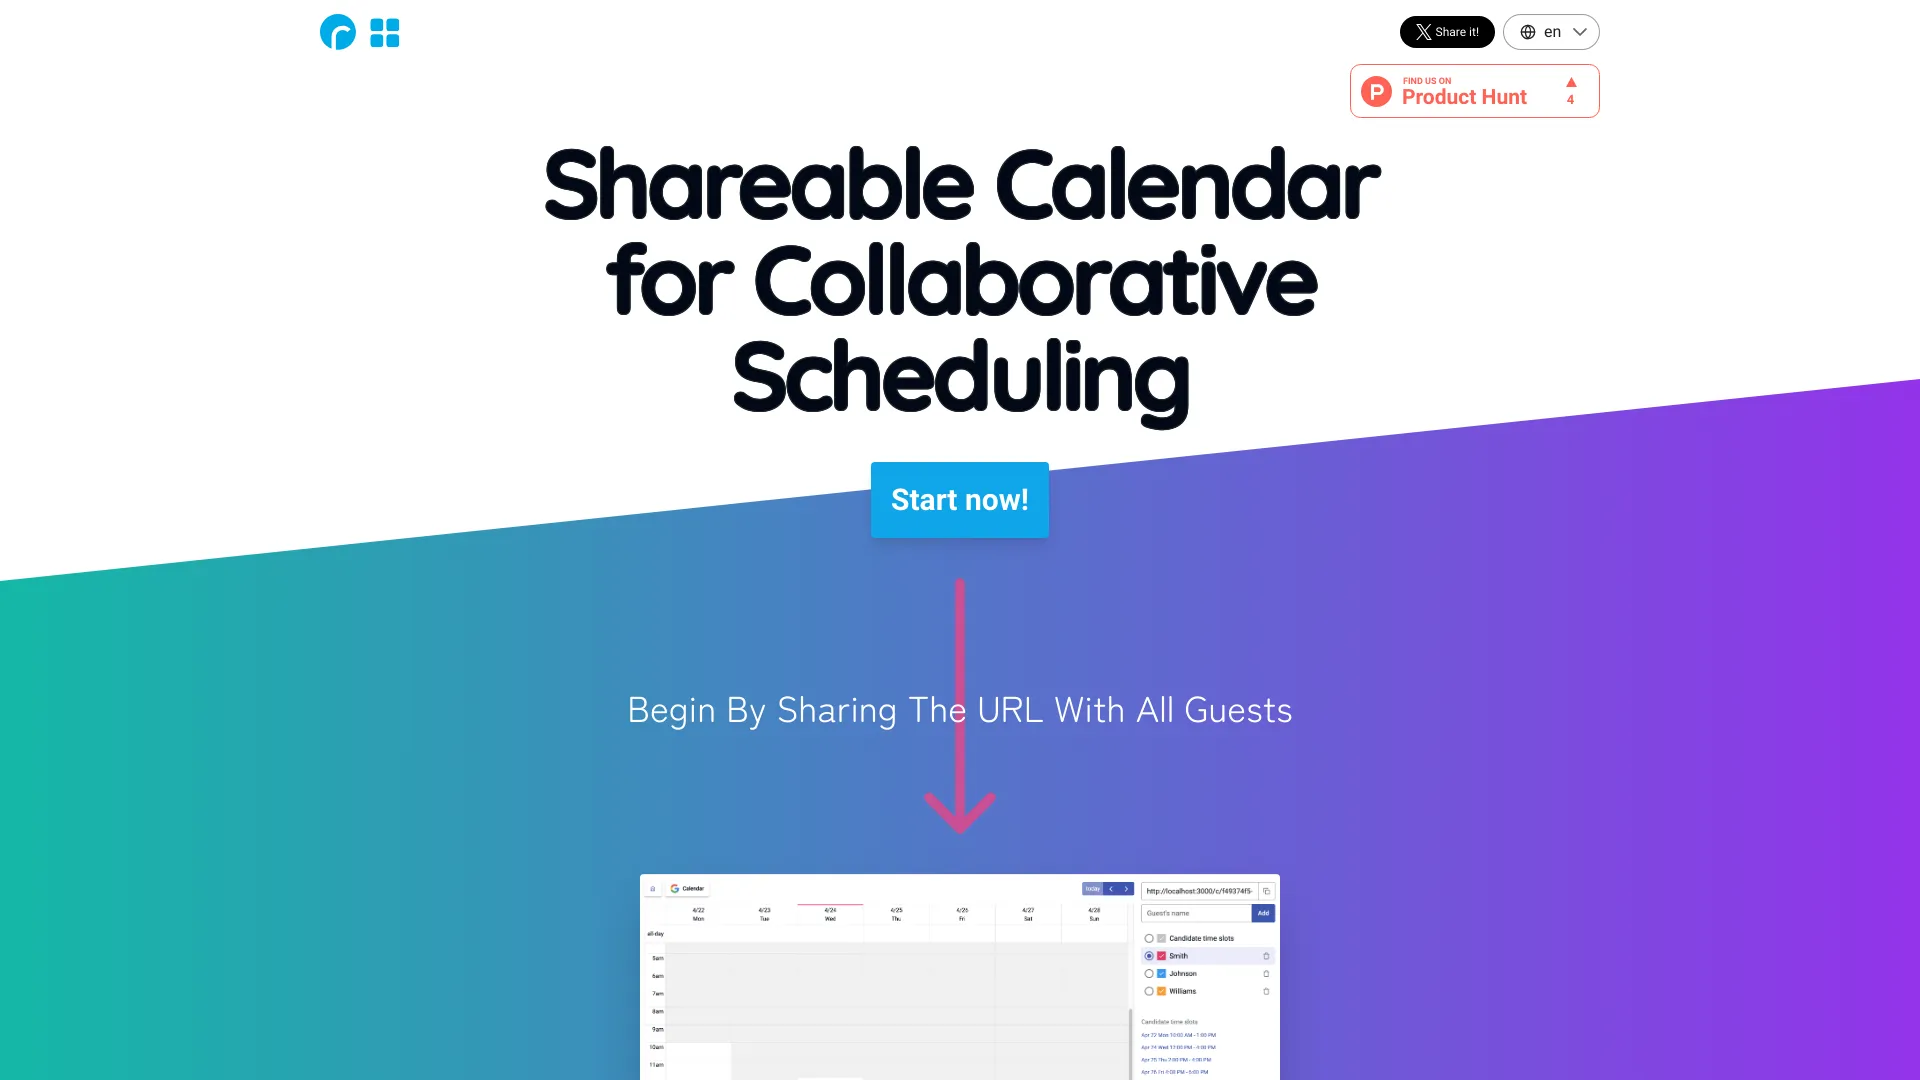 Shareable Calendar for Scheduling